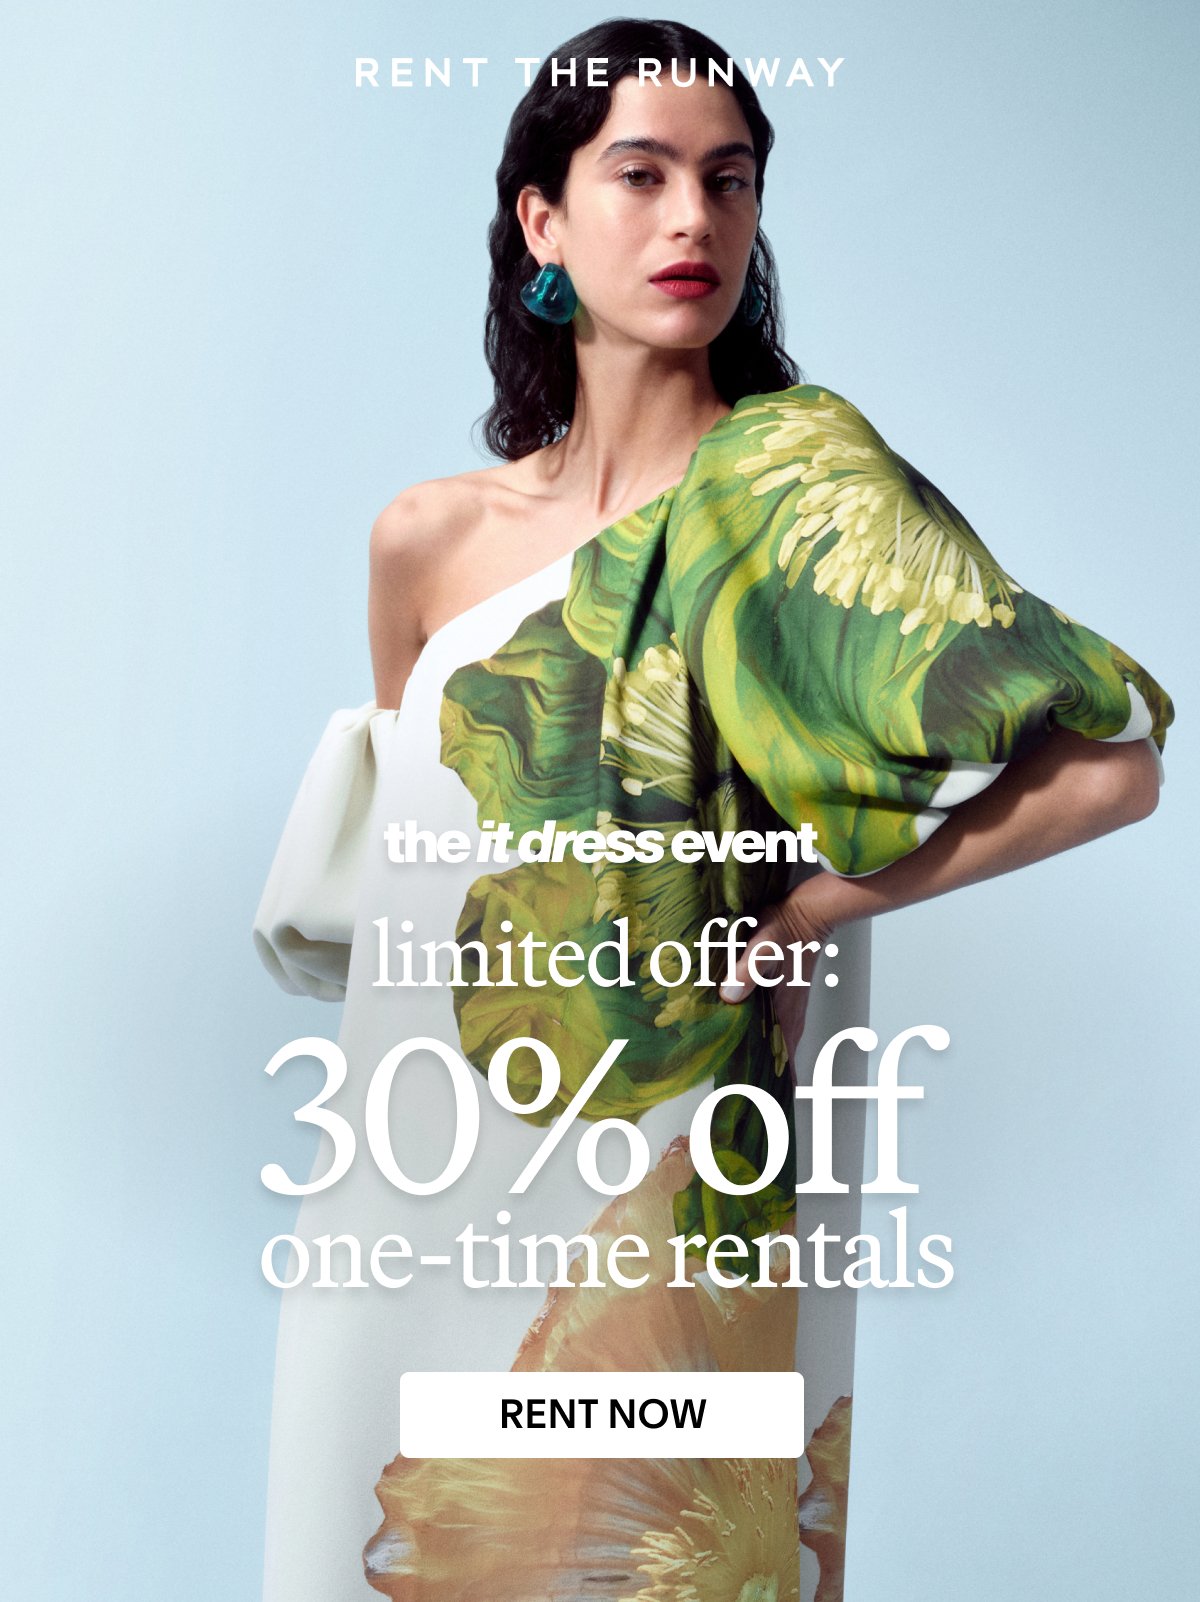 Limited time offer: 30% one-time rentals